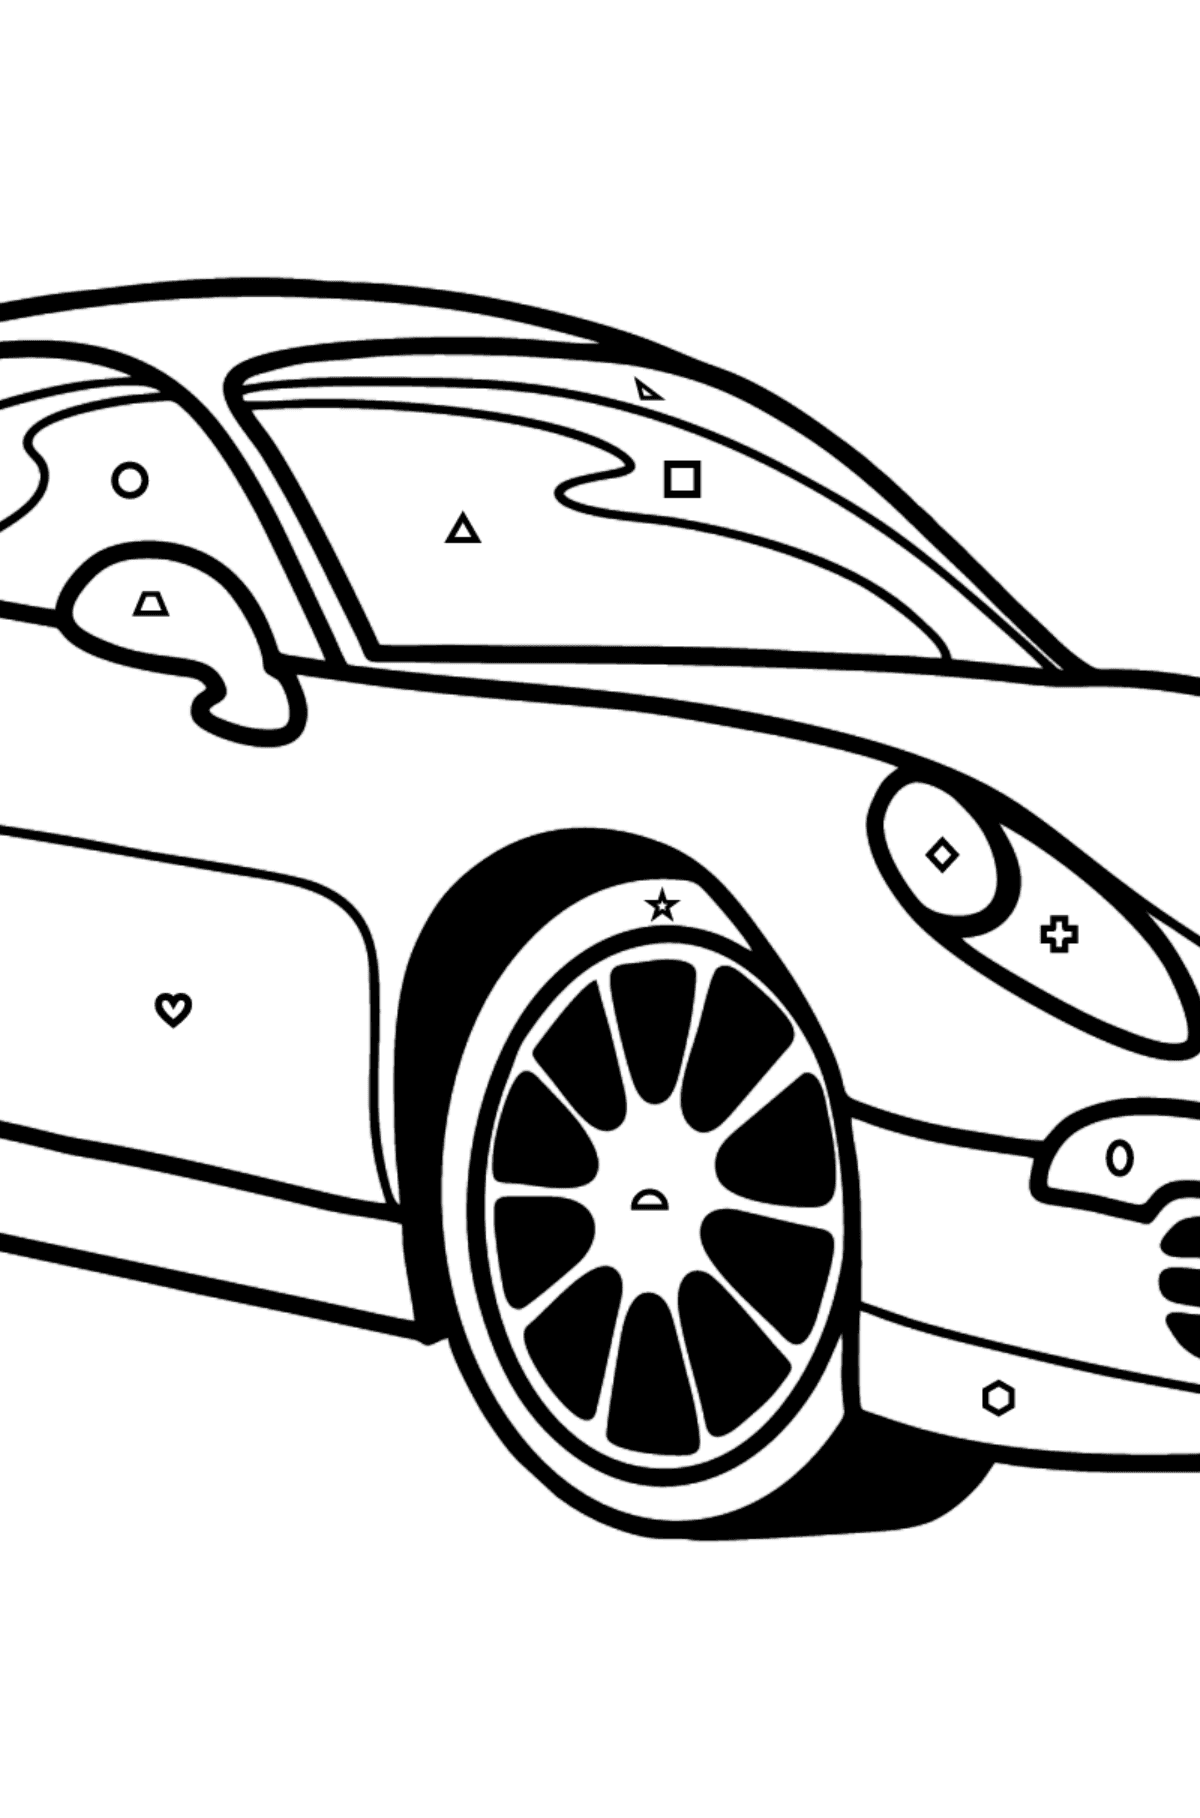 Porsche Cayman Sports Car coloring page - Coloring by Geometric Shapes for Kids